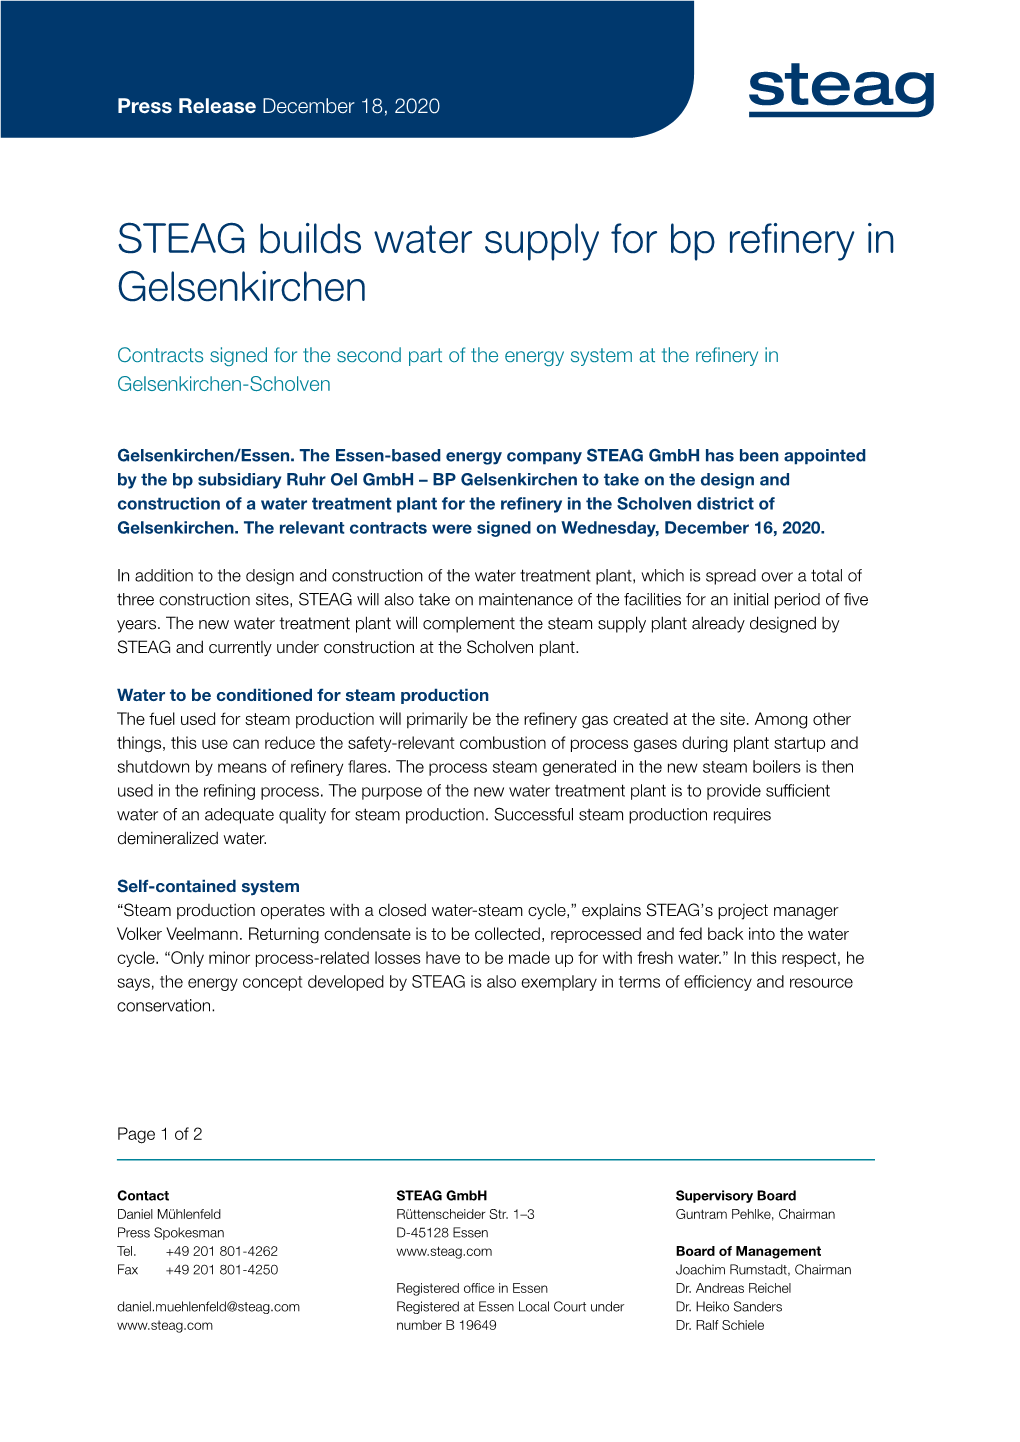 STEAG Builds Water Supply for Bp Refinery in Gelsenkirchen